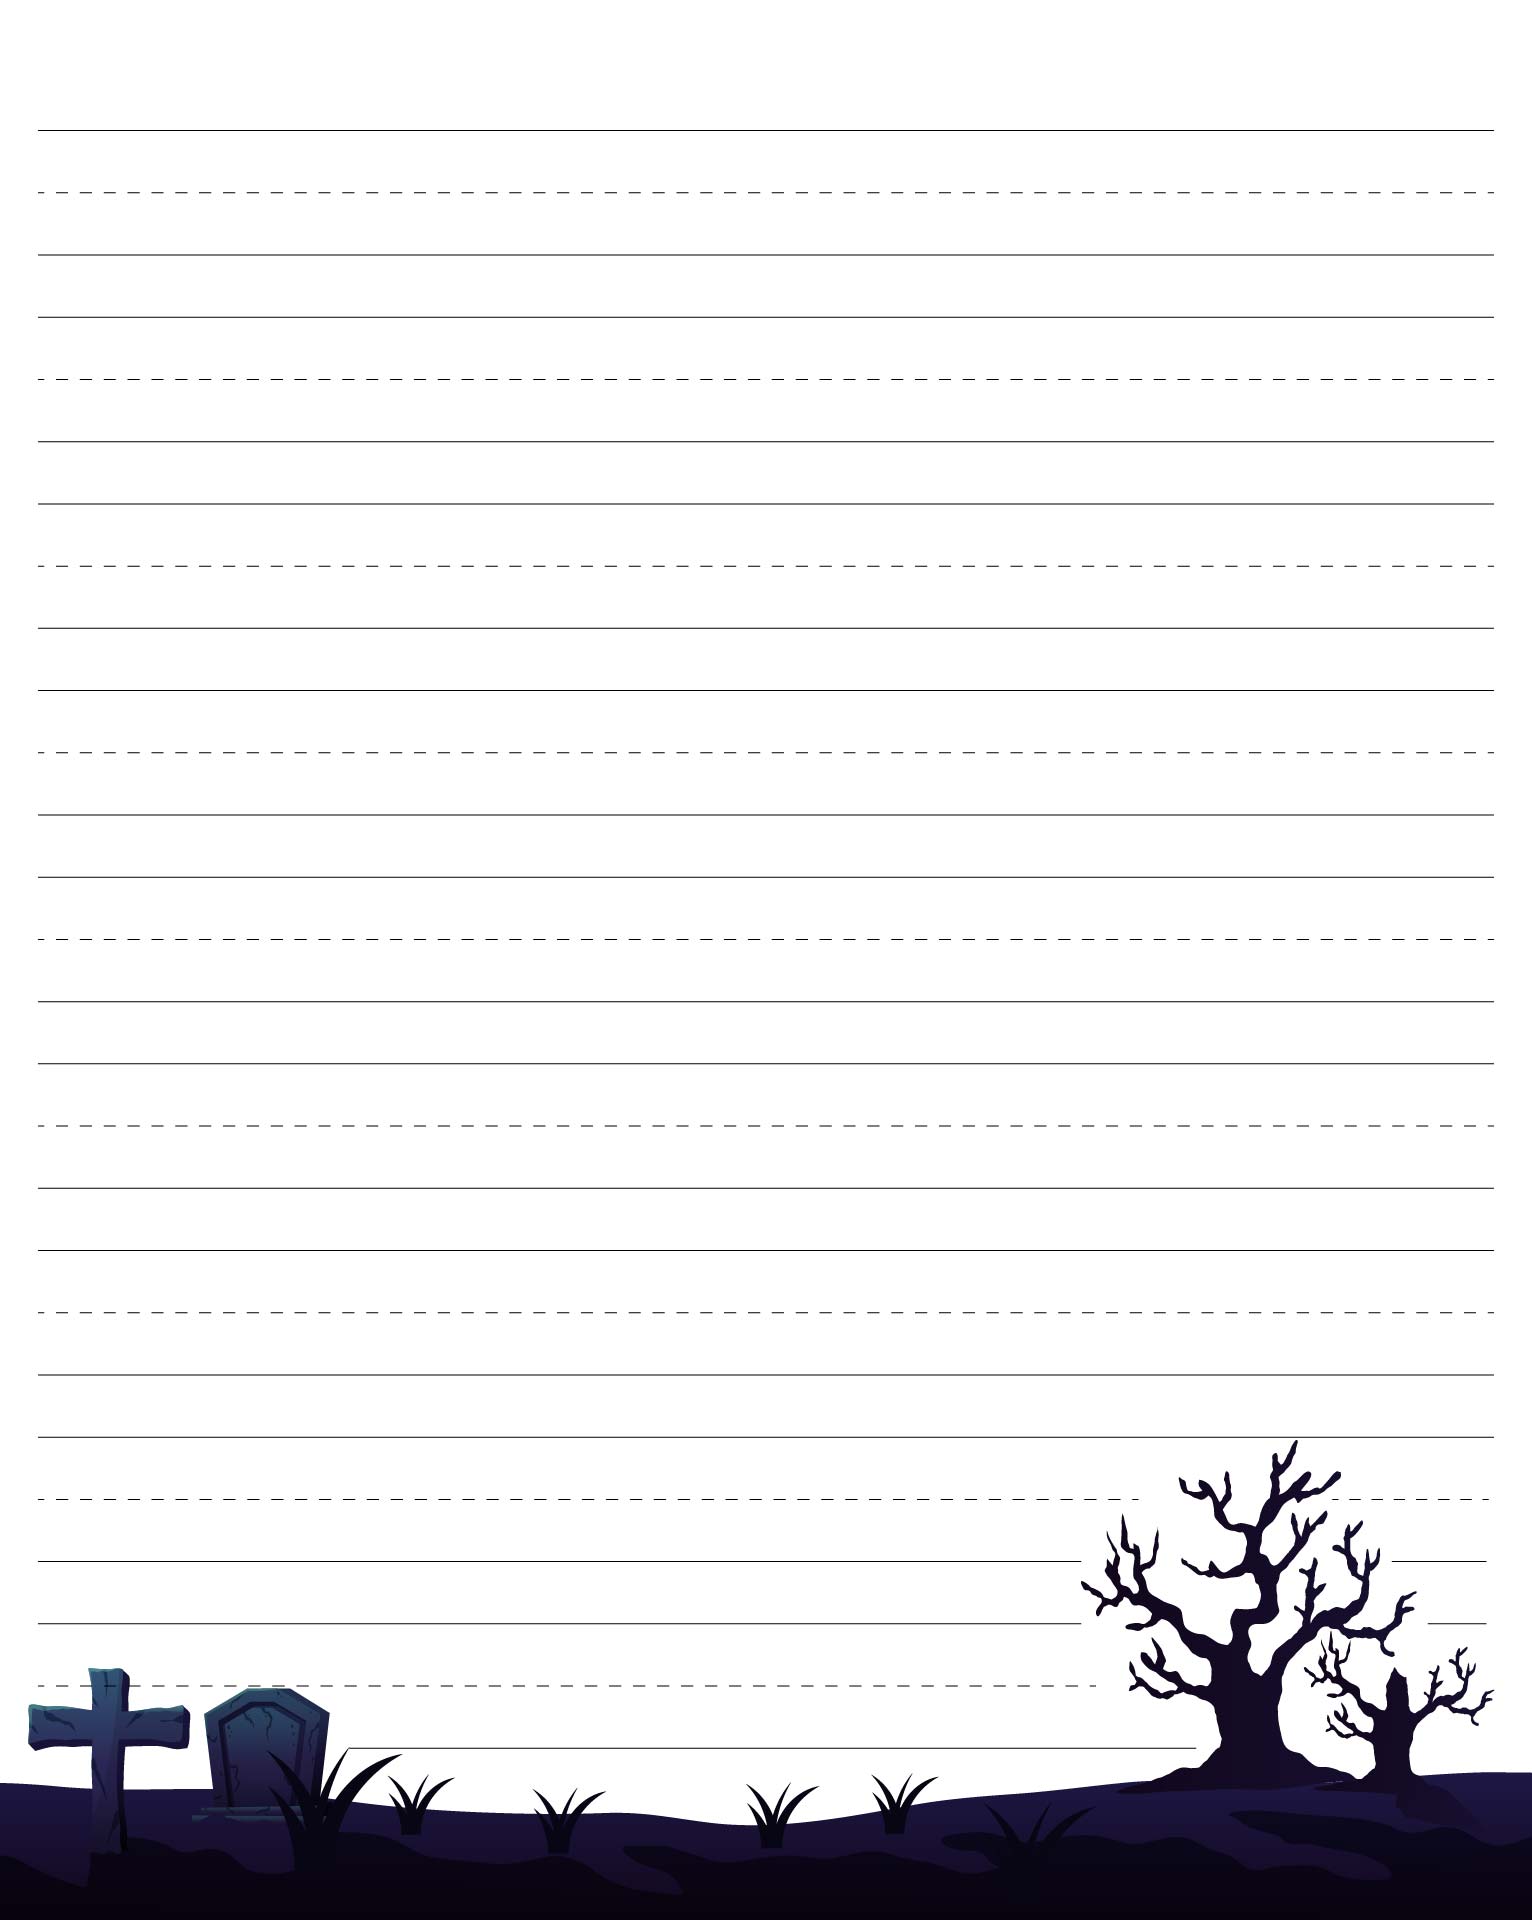 Halloween Writing Paper And Envelope Printable